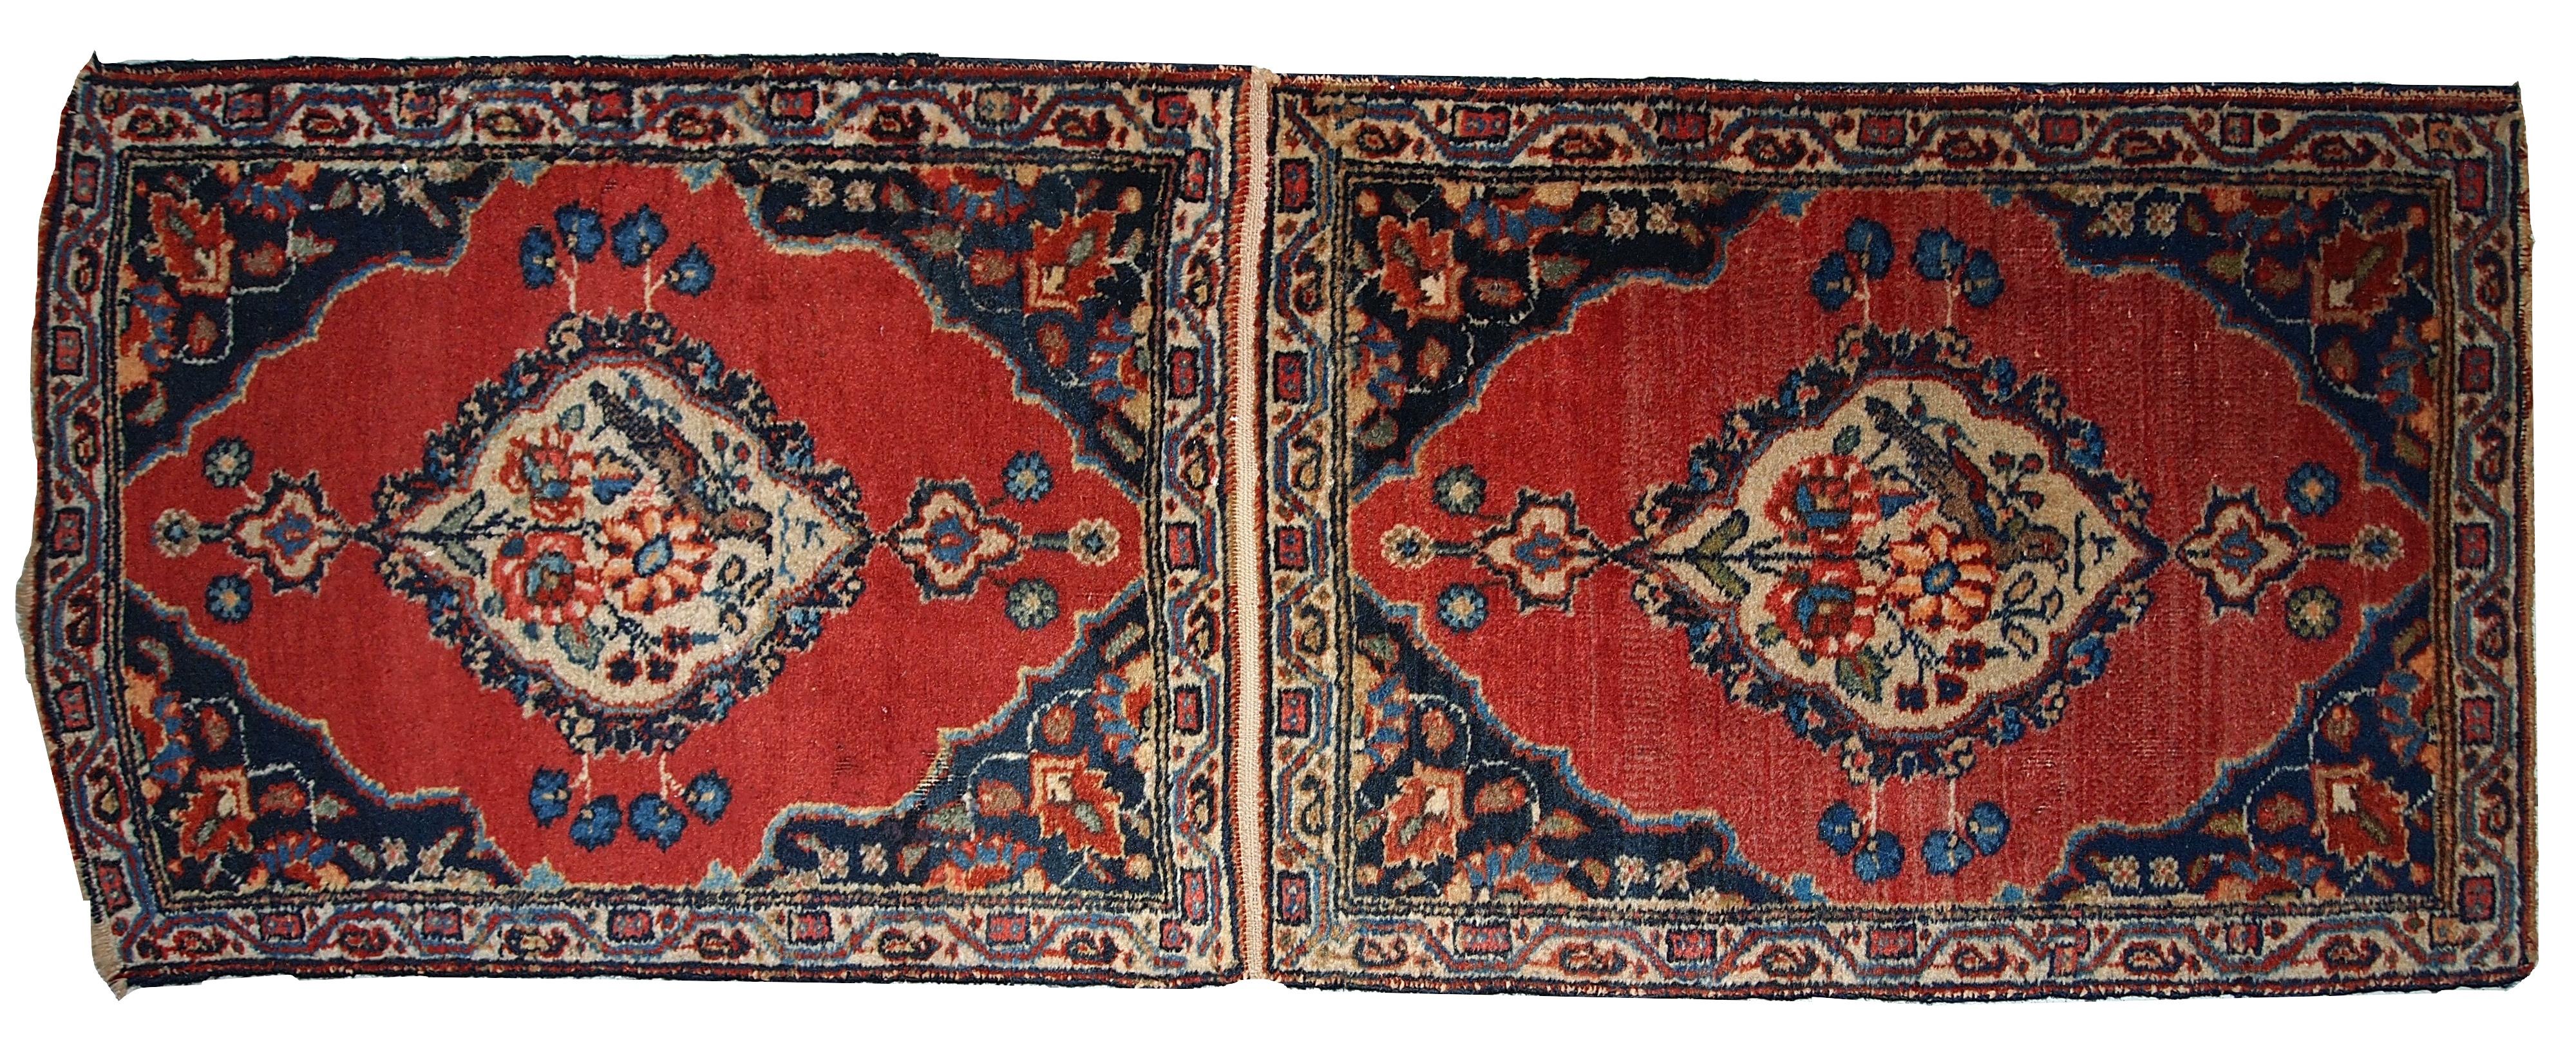 Antique Tabriz double mat in original good condition, one of the rugs has some low pile. The design is traditional with decorative birds in the centre. Measures: 1.7' x 4.7' (52 cm x 143 cm).